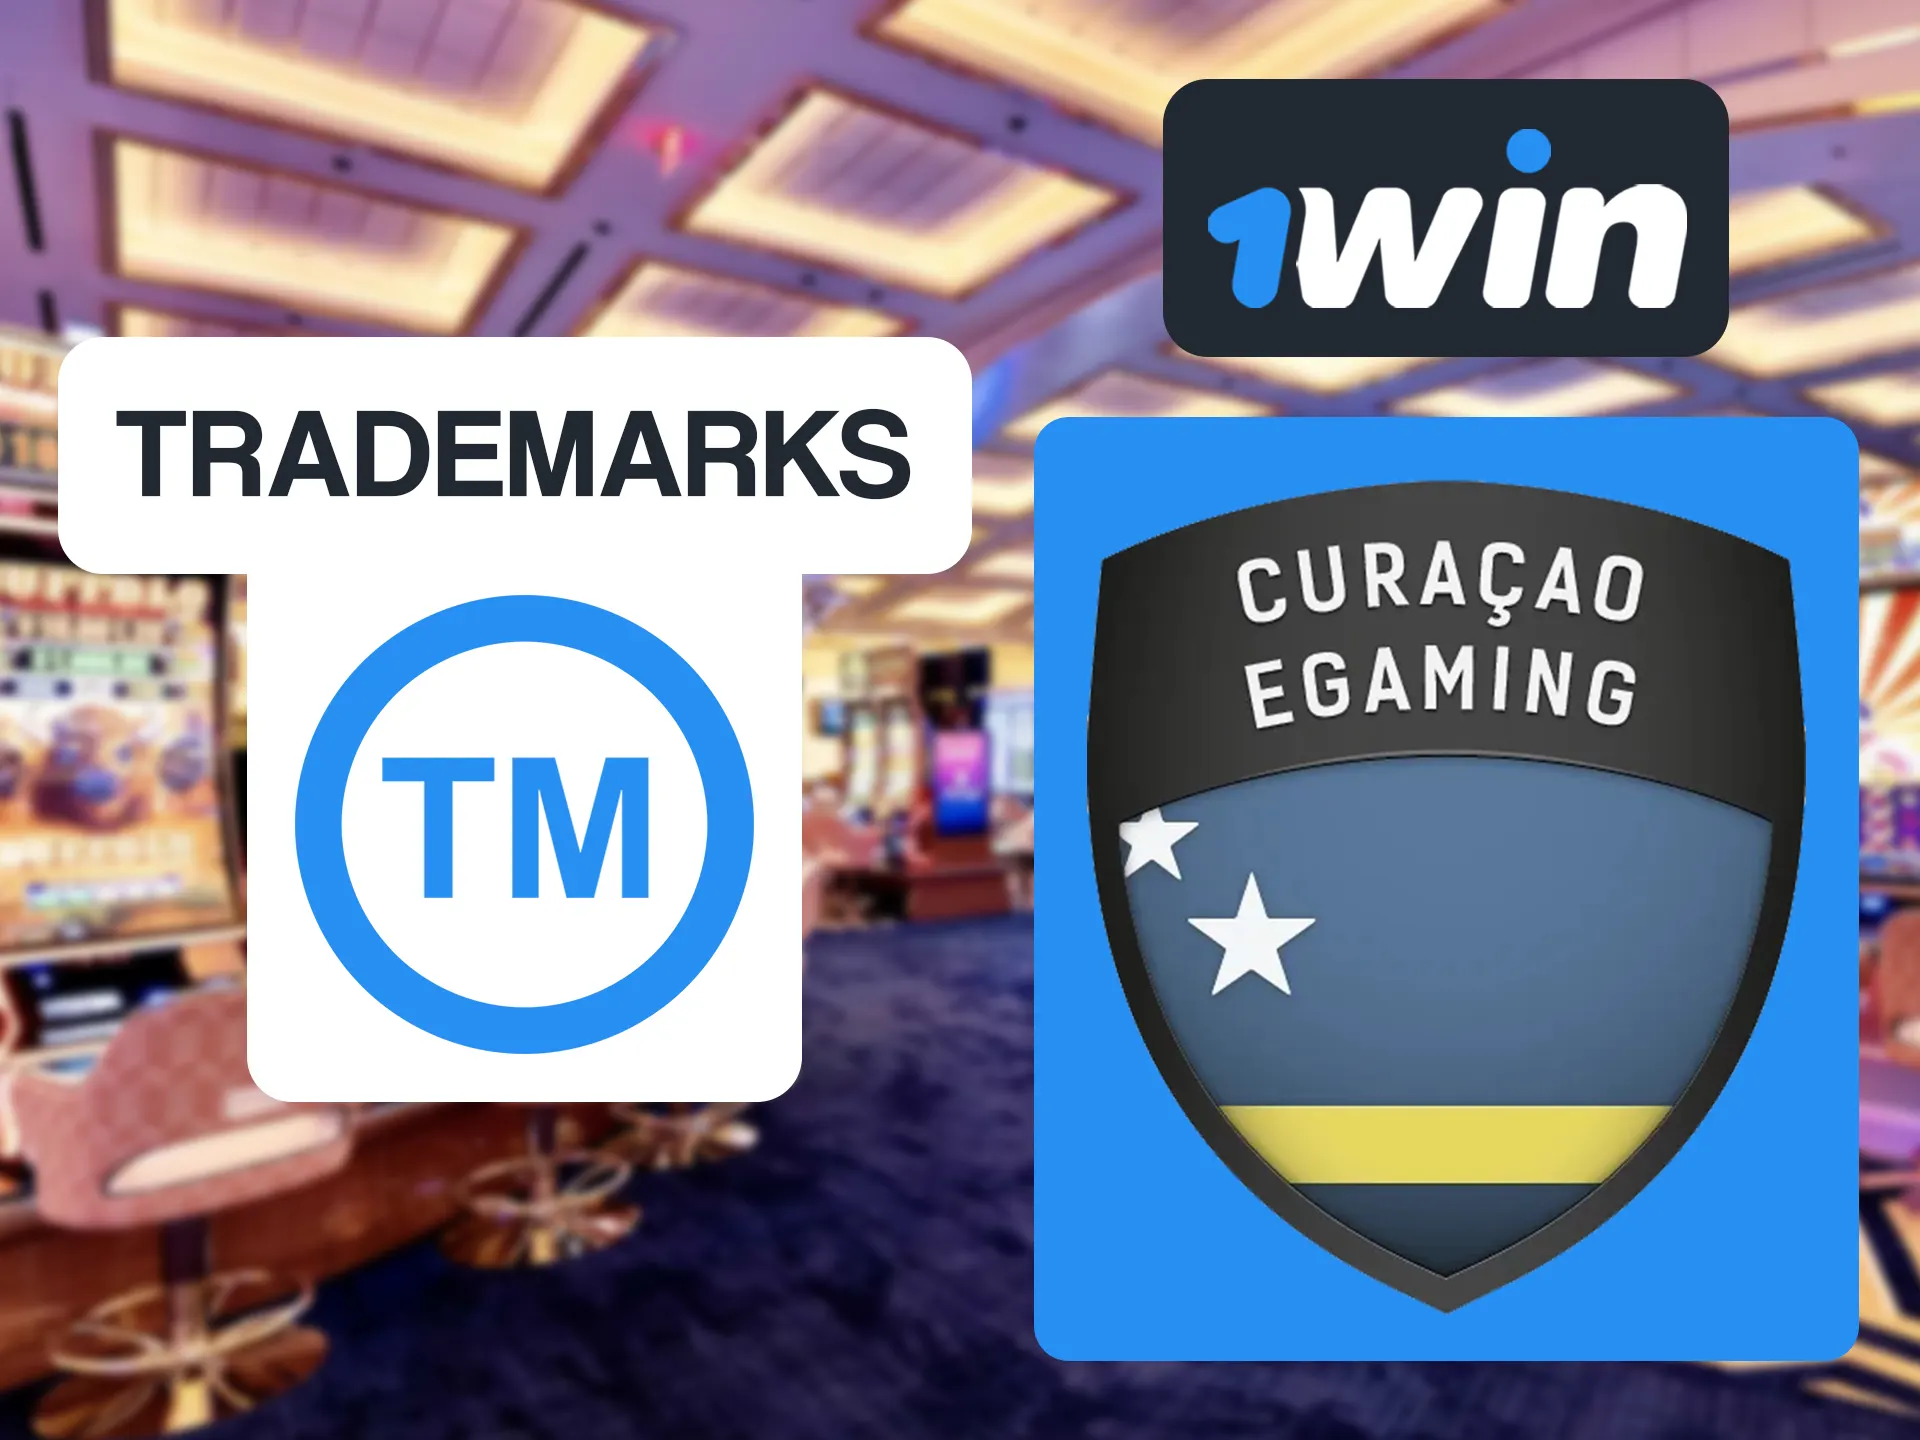 1win has all of the required trademarks.